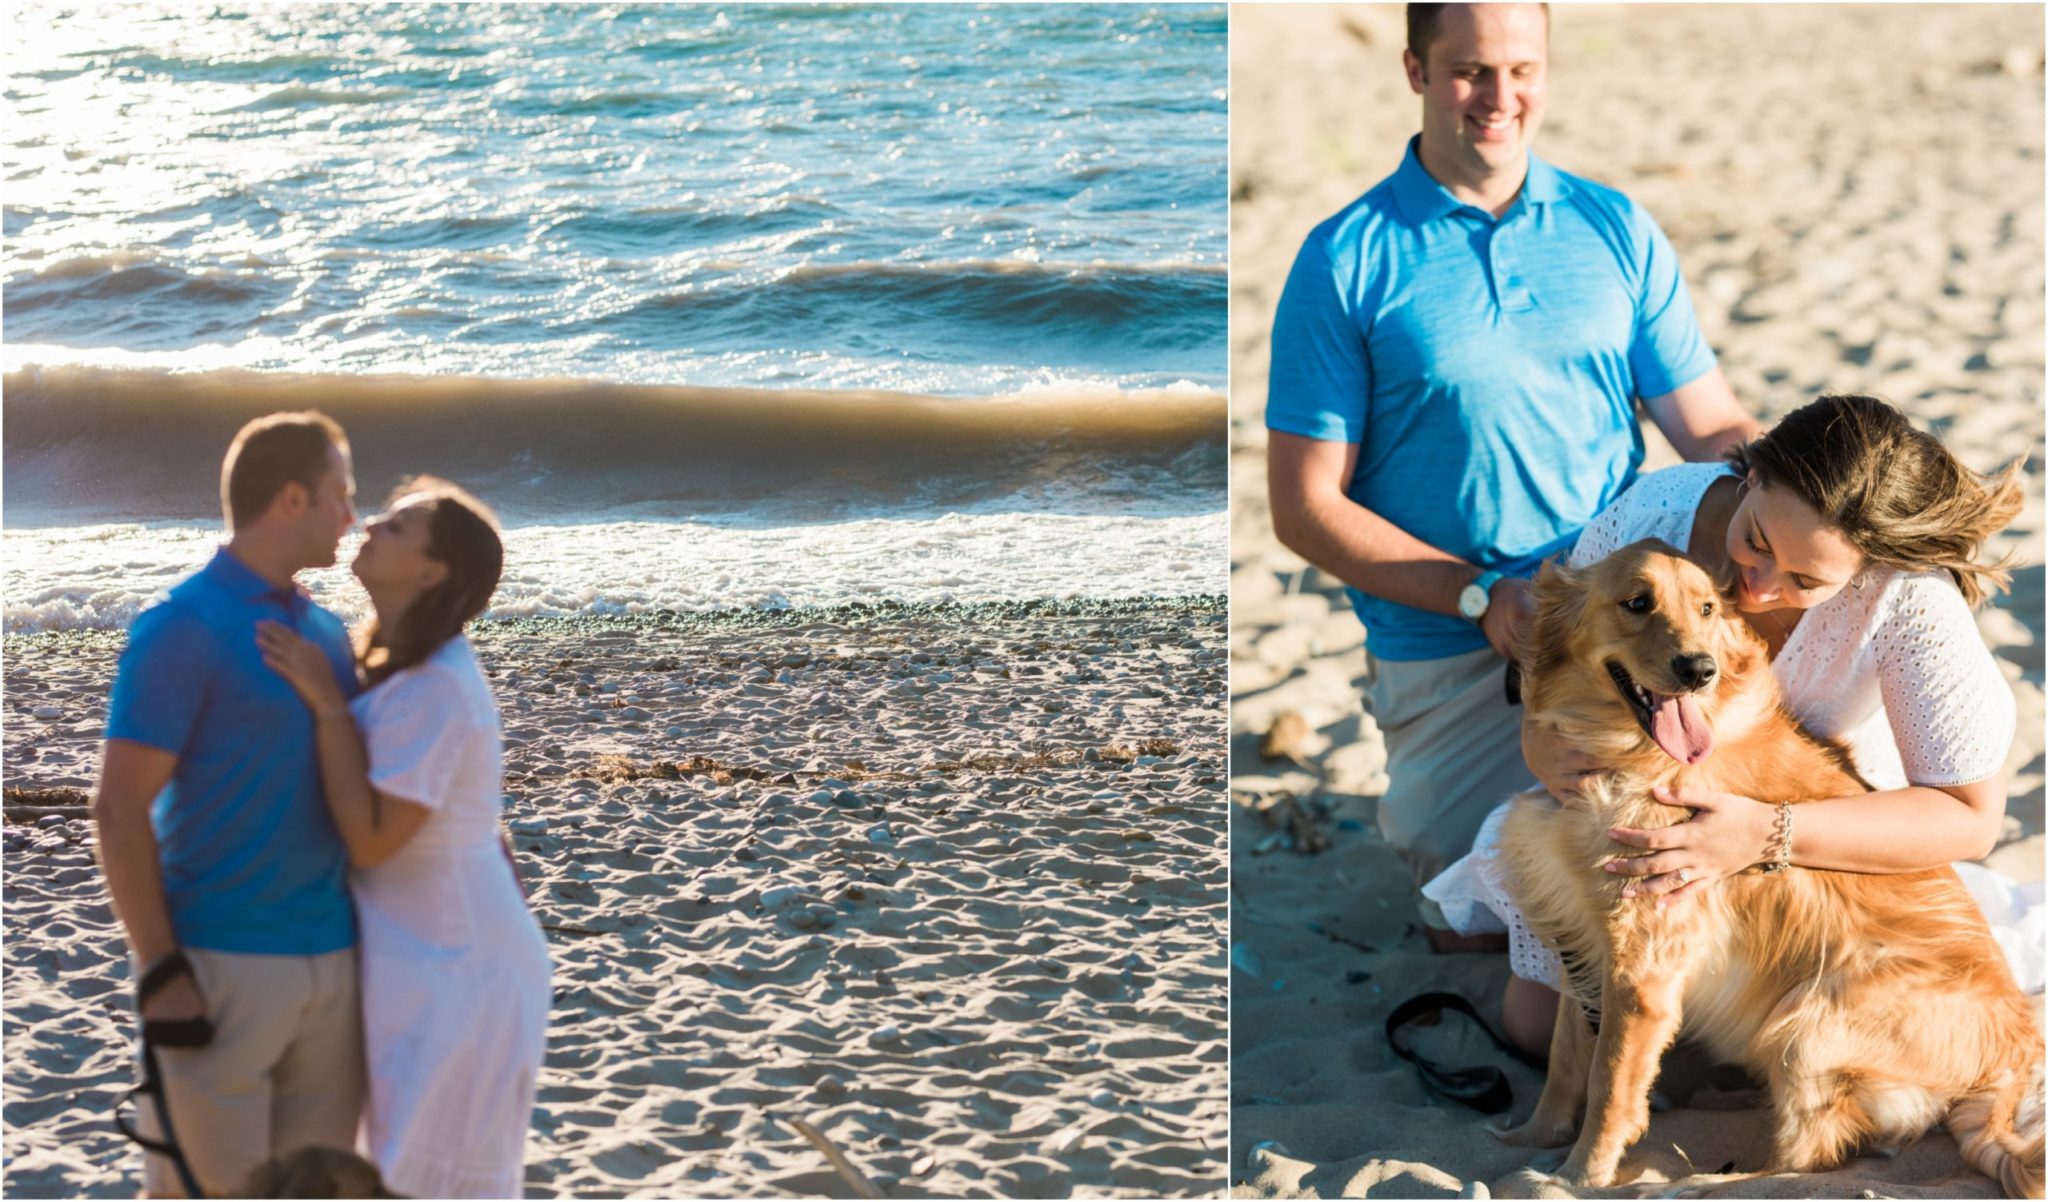 Collage image of a couple on the beach with their dog.